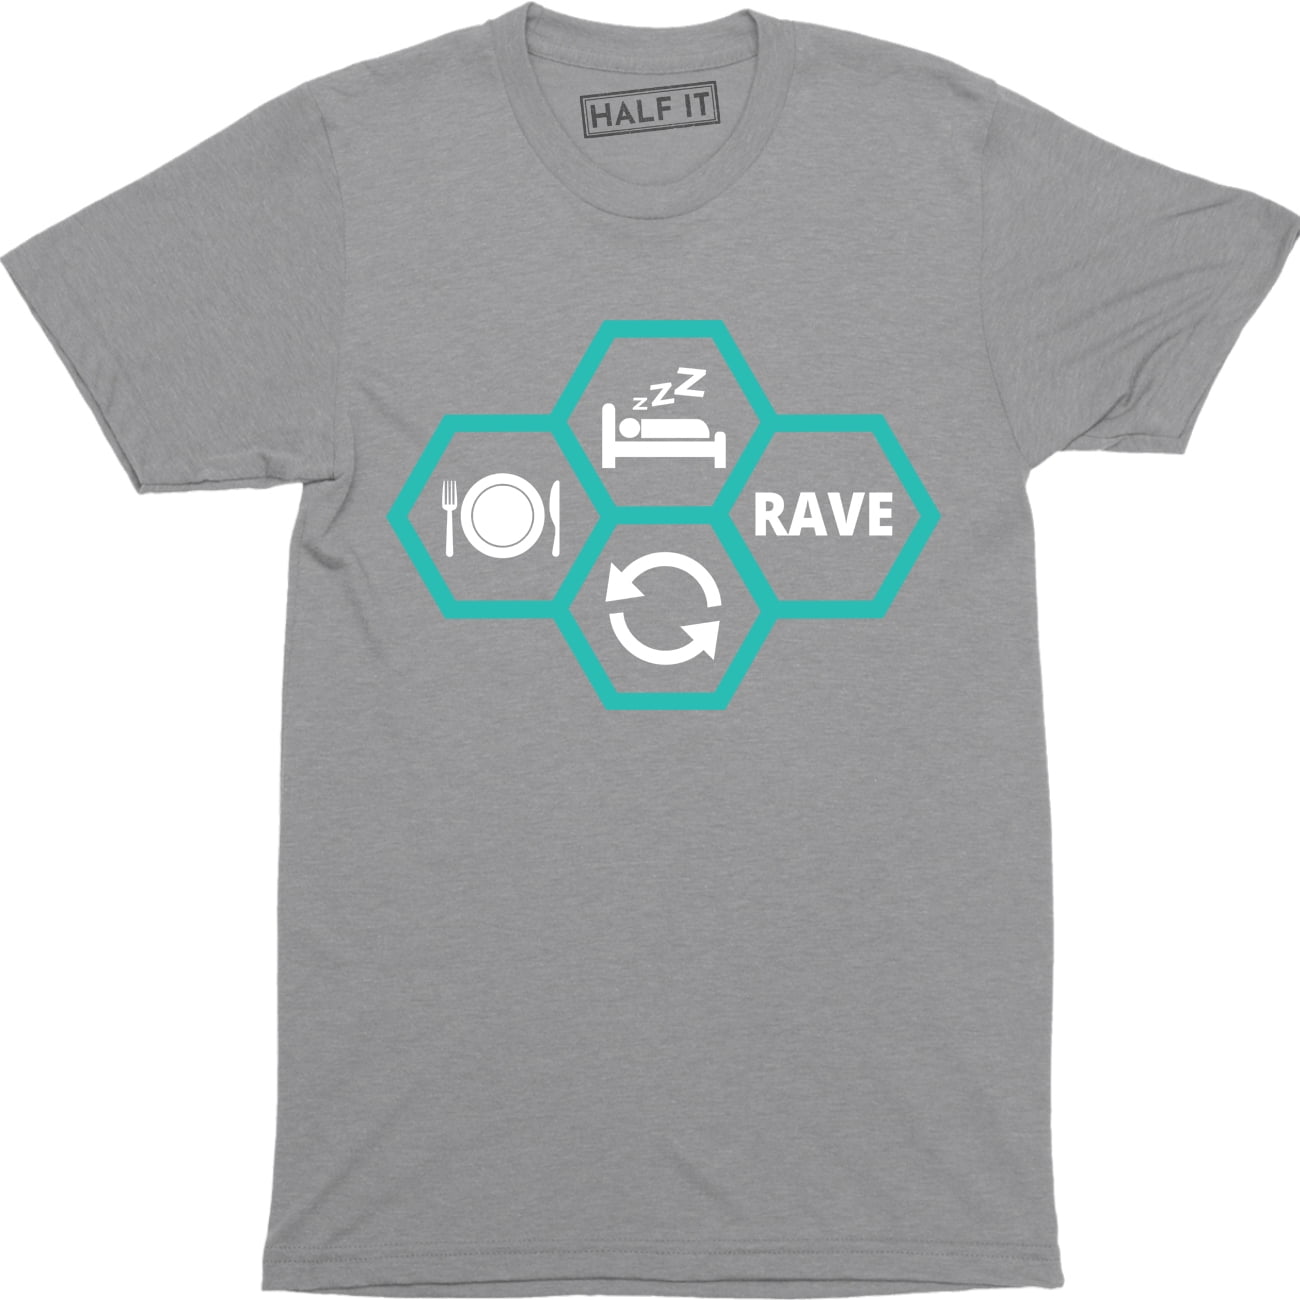 T-SHIRT EAT SLEEP RAVE REPEAT dance techno party festival All SIZES COLS 